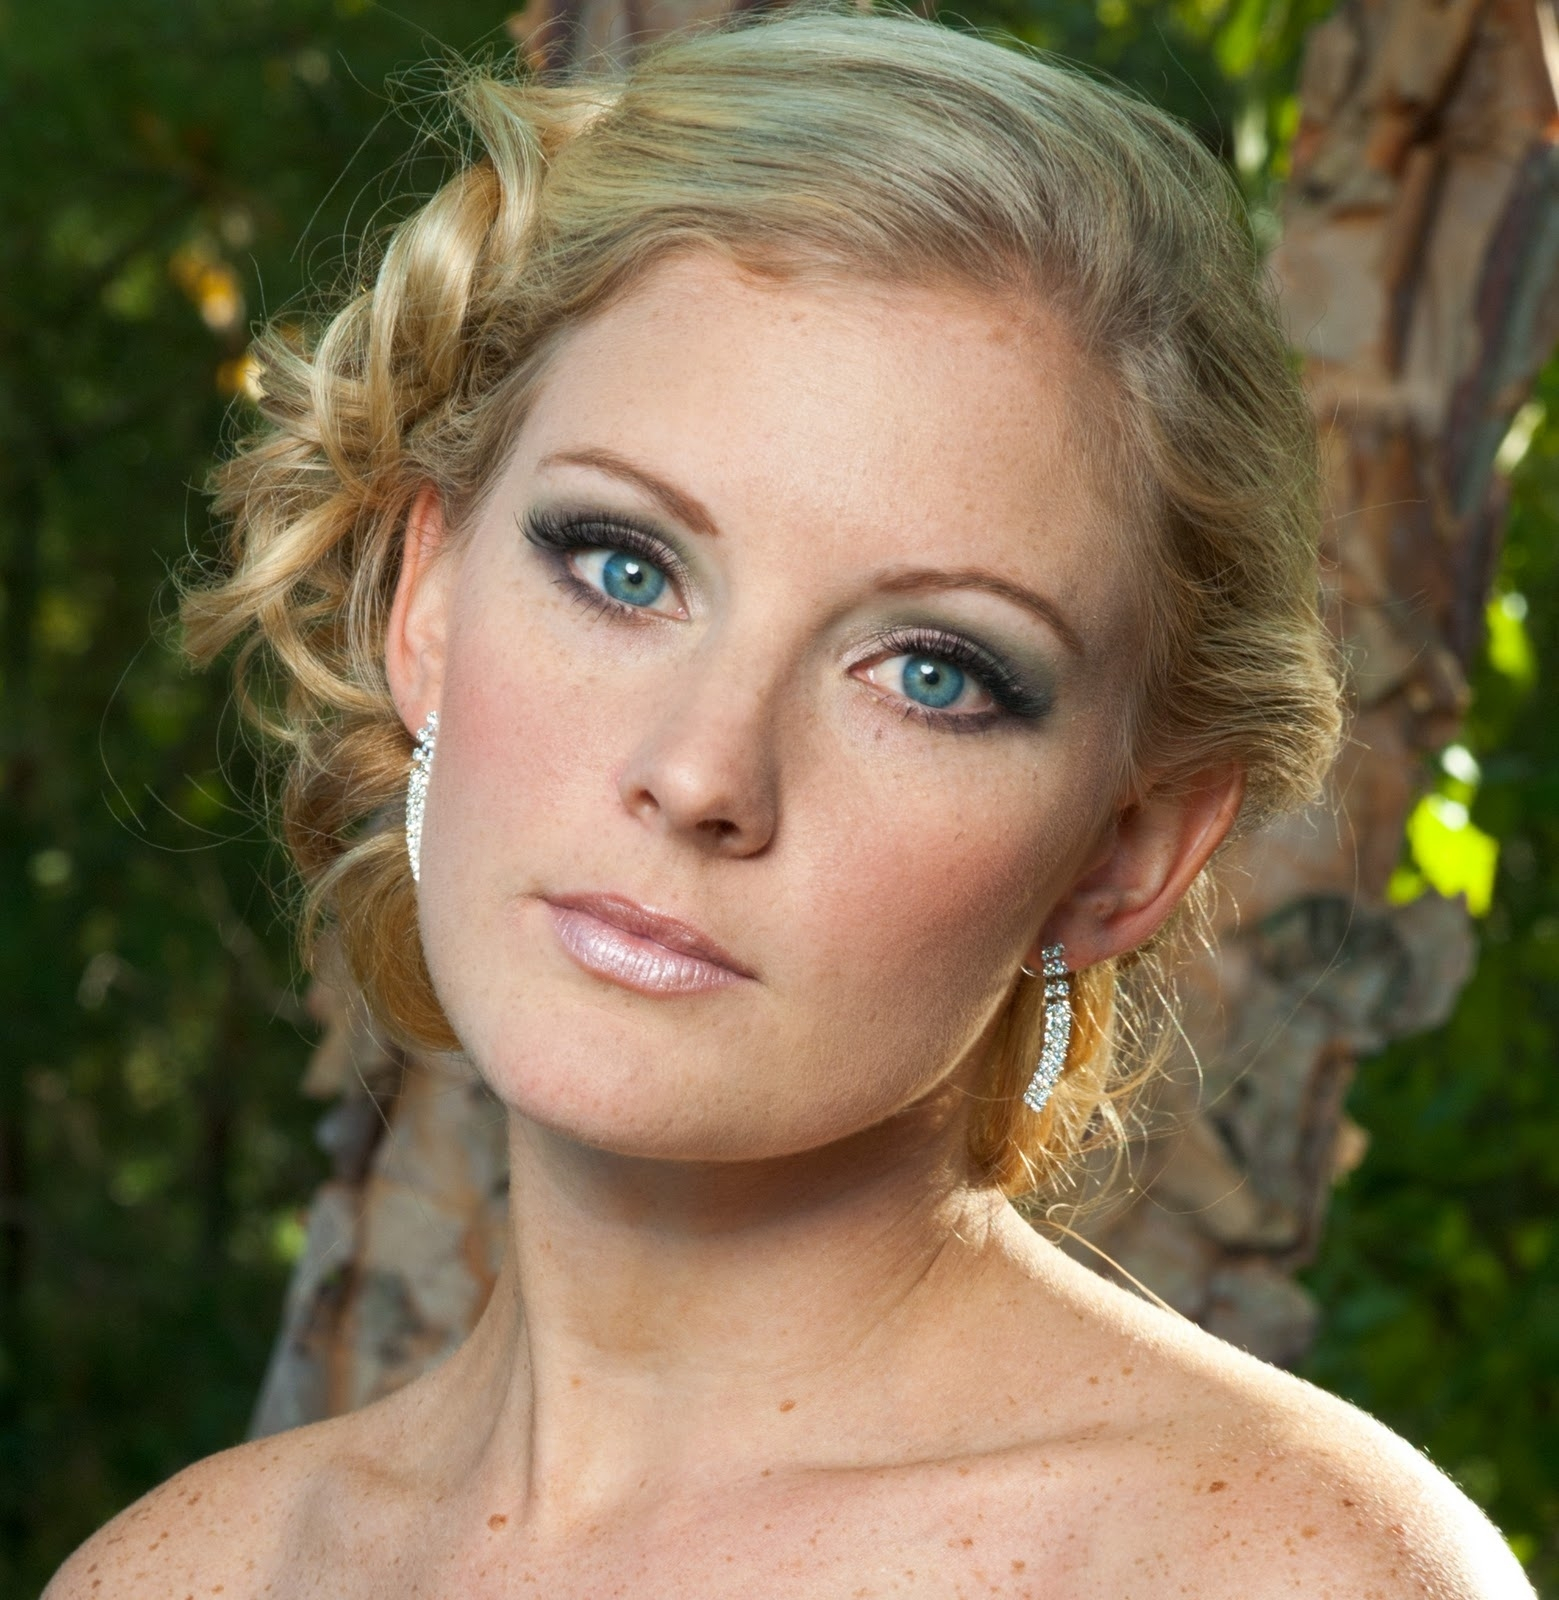 Wedding Makeup For Green Eyes Makeup Tips For Blue Green Eyes And Light Brown Hair Wavy Haircut